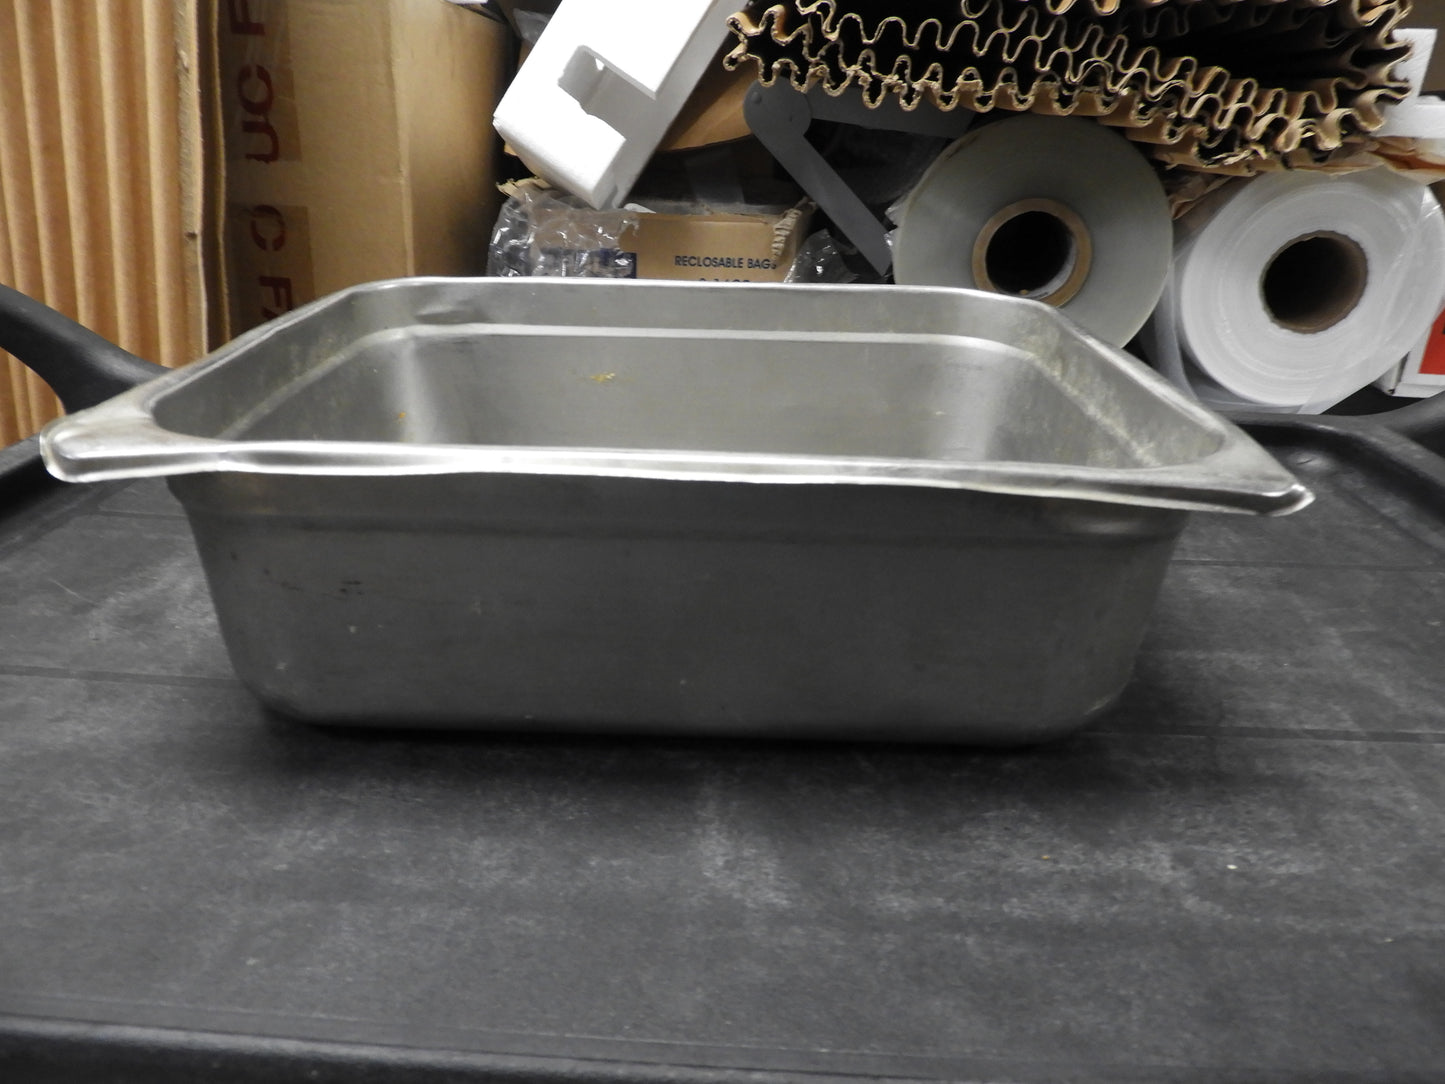 1/2 Size Stainless Steel Steam Table / Hotel Pan - 4" Deep